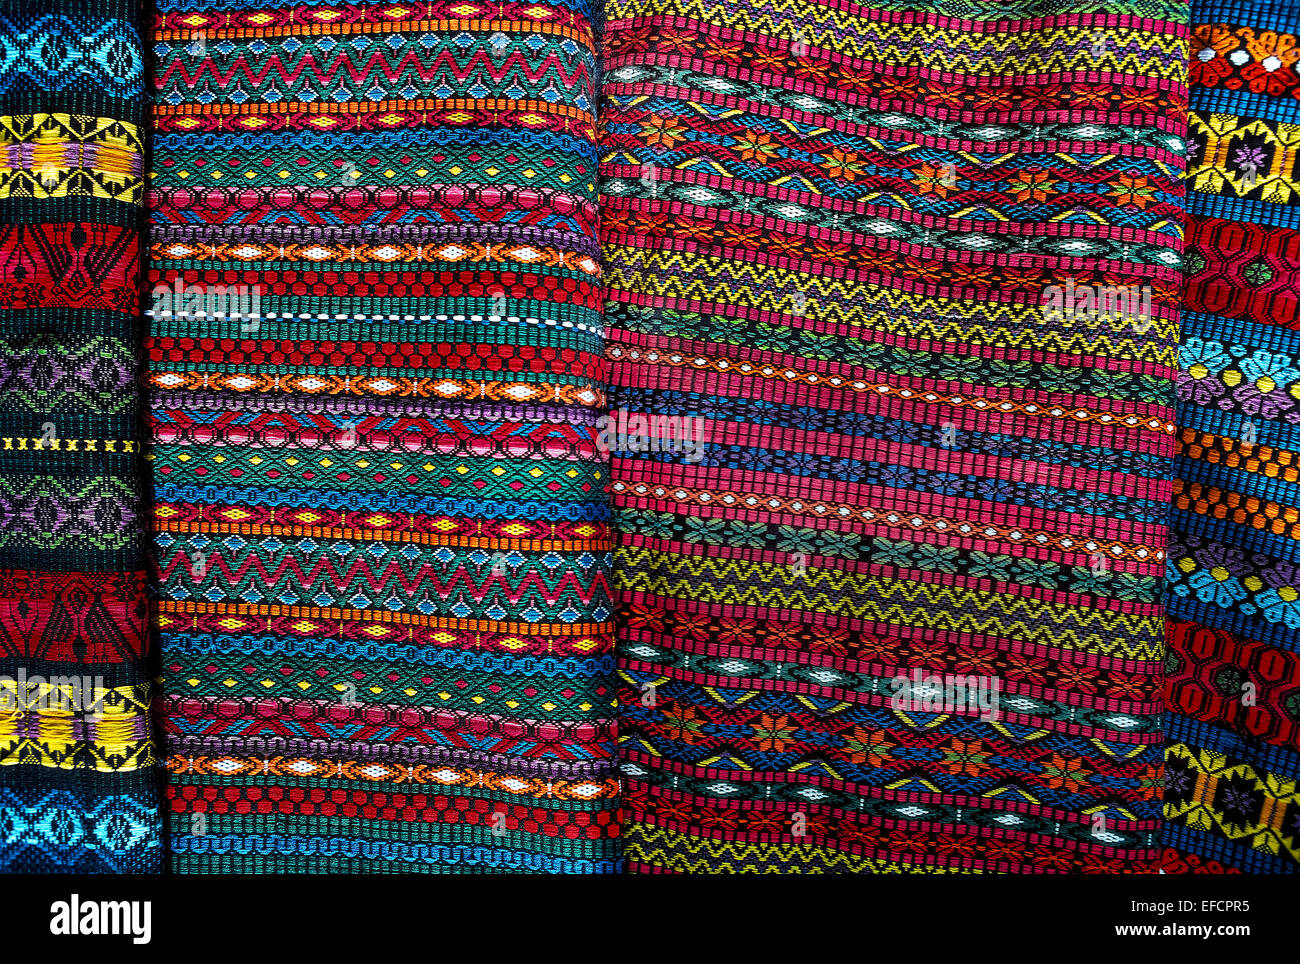 Beautiful colors and intricate geometrical designs identify the fabrics handwoven by Mayan women in the highlands of Guatemala. Stock Photo